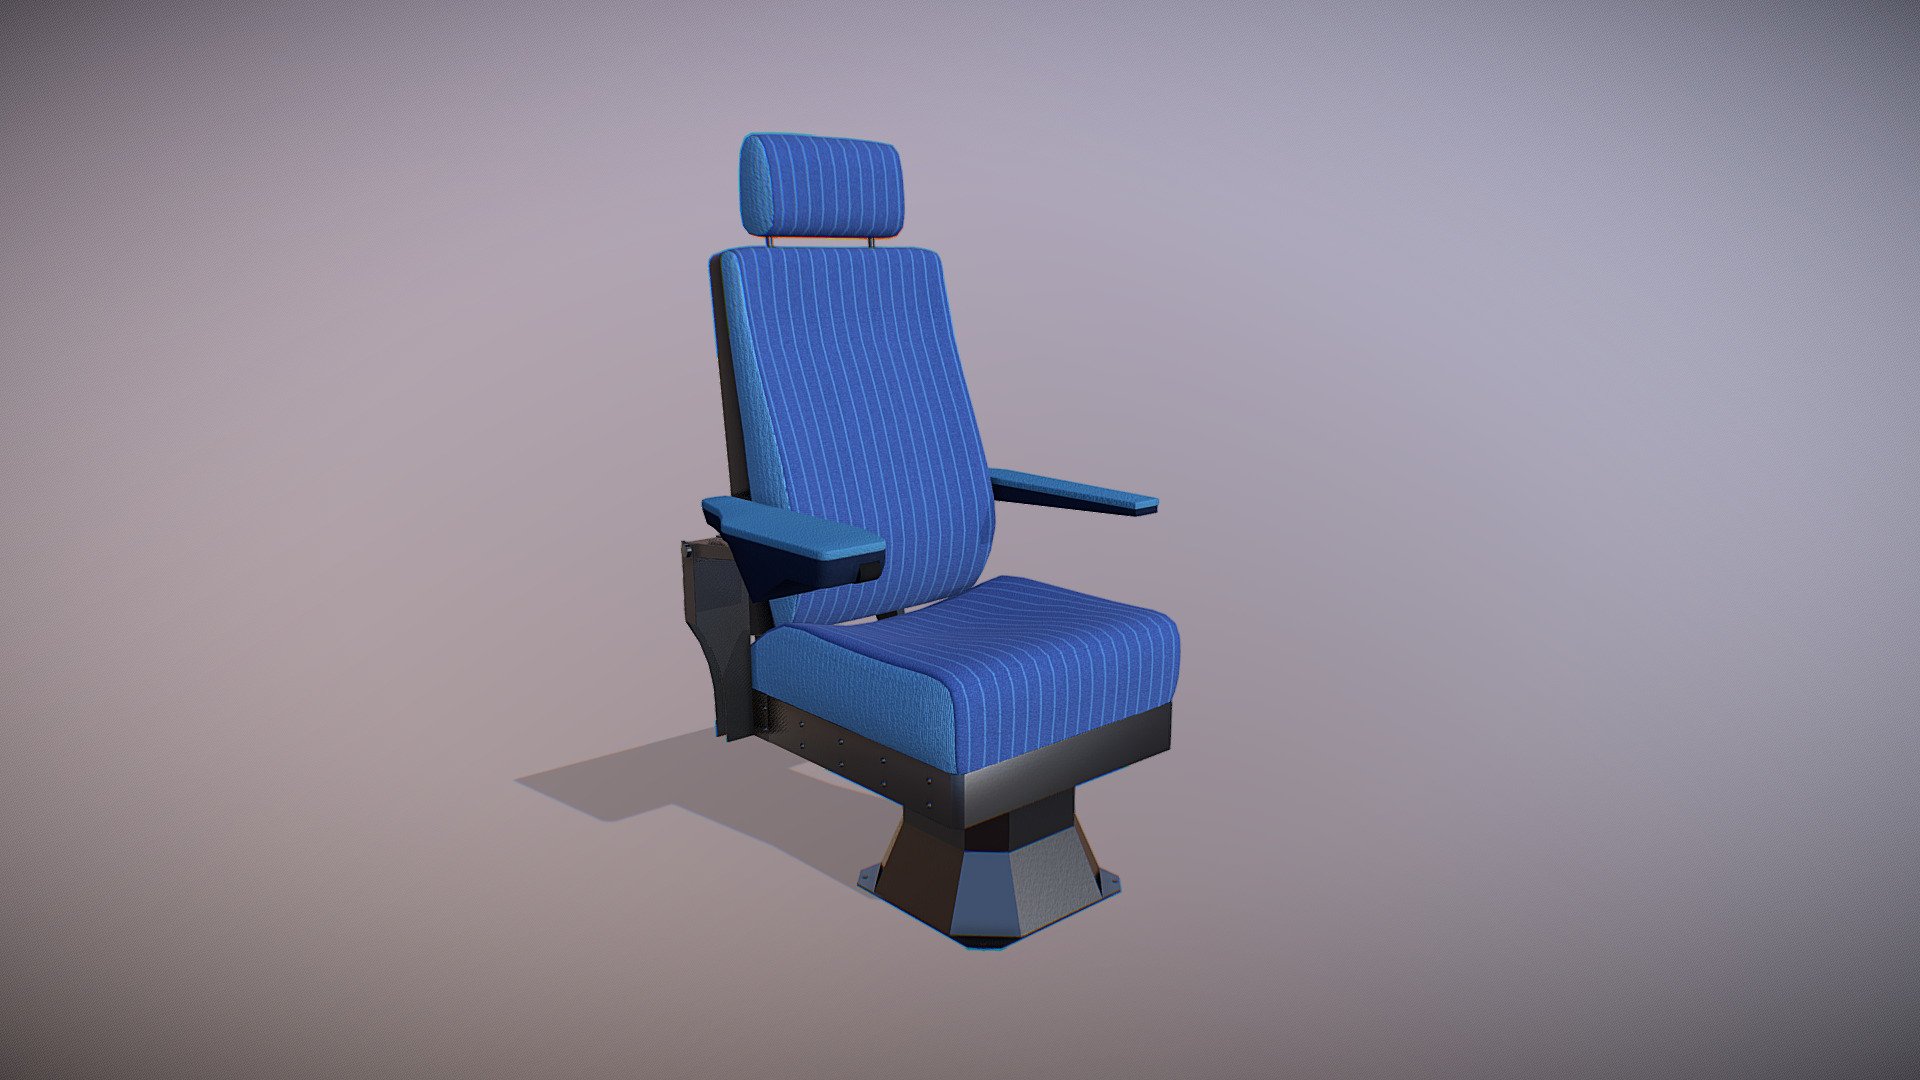 This A320 Pilot Chair was made from scratch using 2k &amp; 4k textures, the quality is very detailed.

Please do not forget to credit us for using this 3D model - A320 - Airbus Pilot Chair - Download Free 3D model by SanForge Studio (@SanForge) 3d model